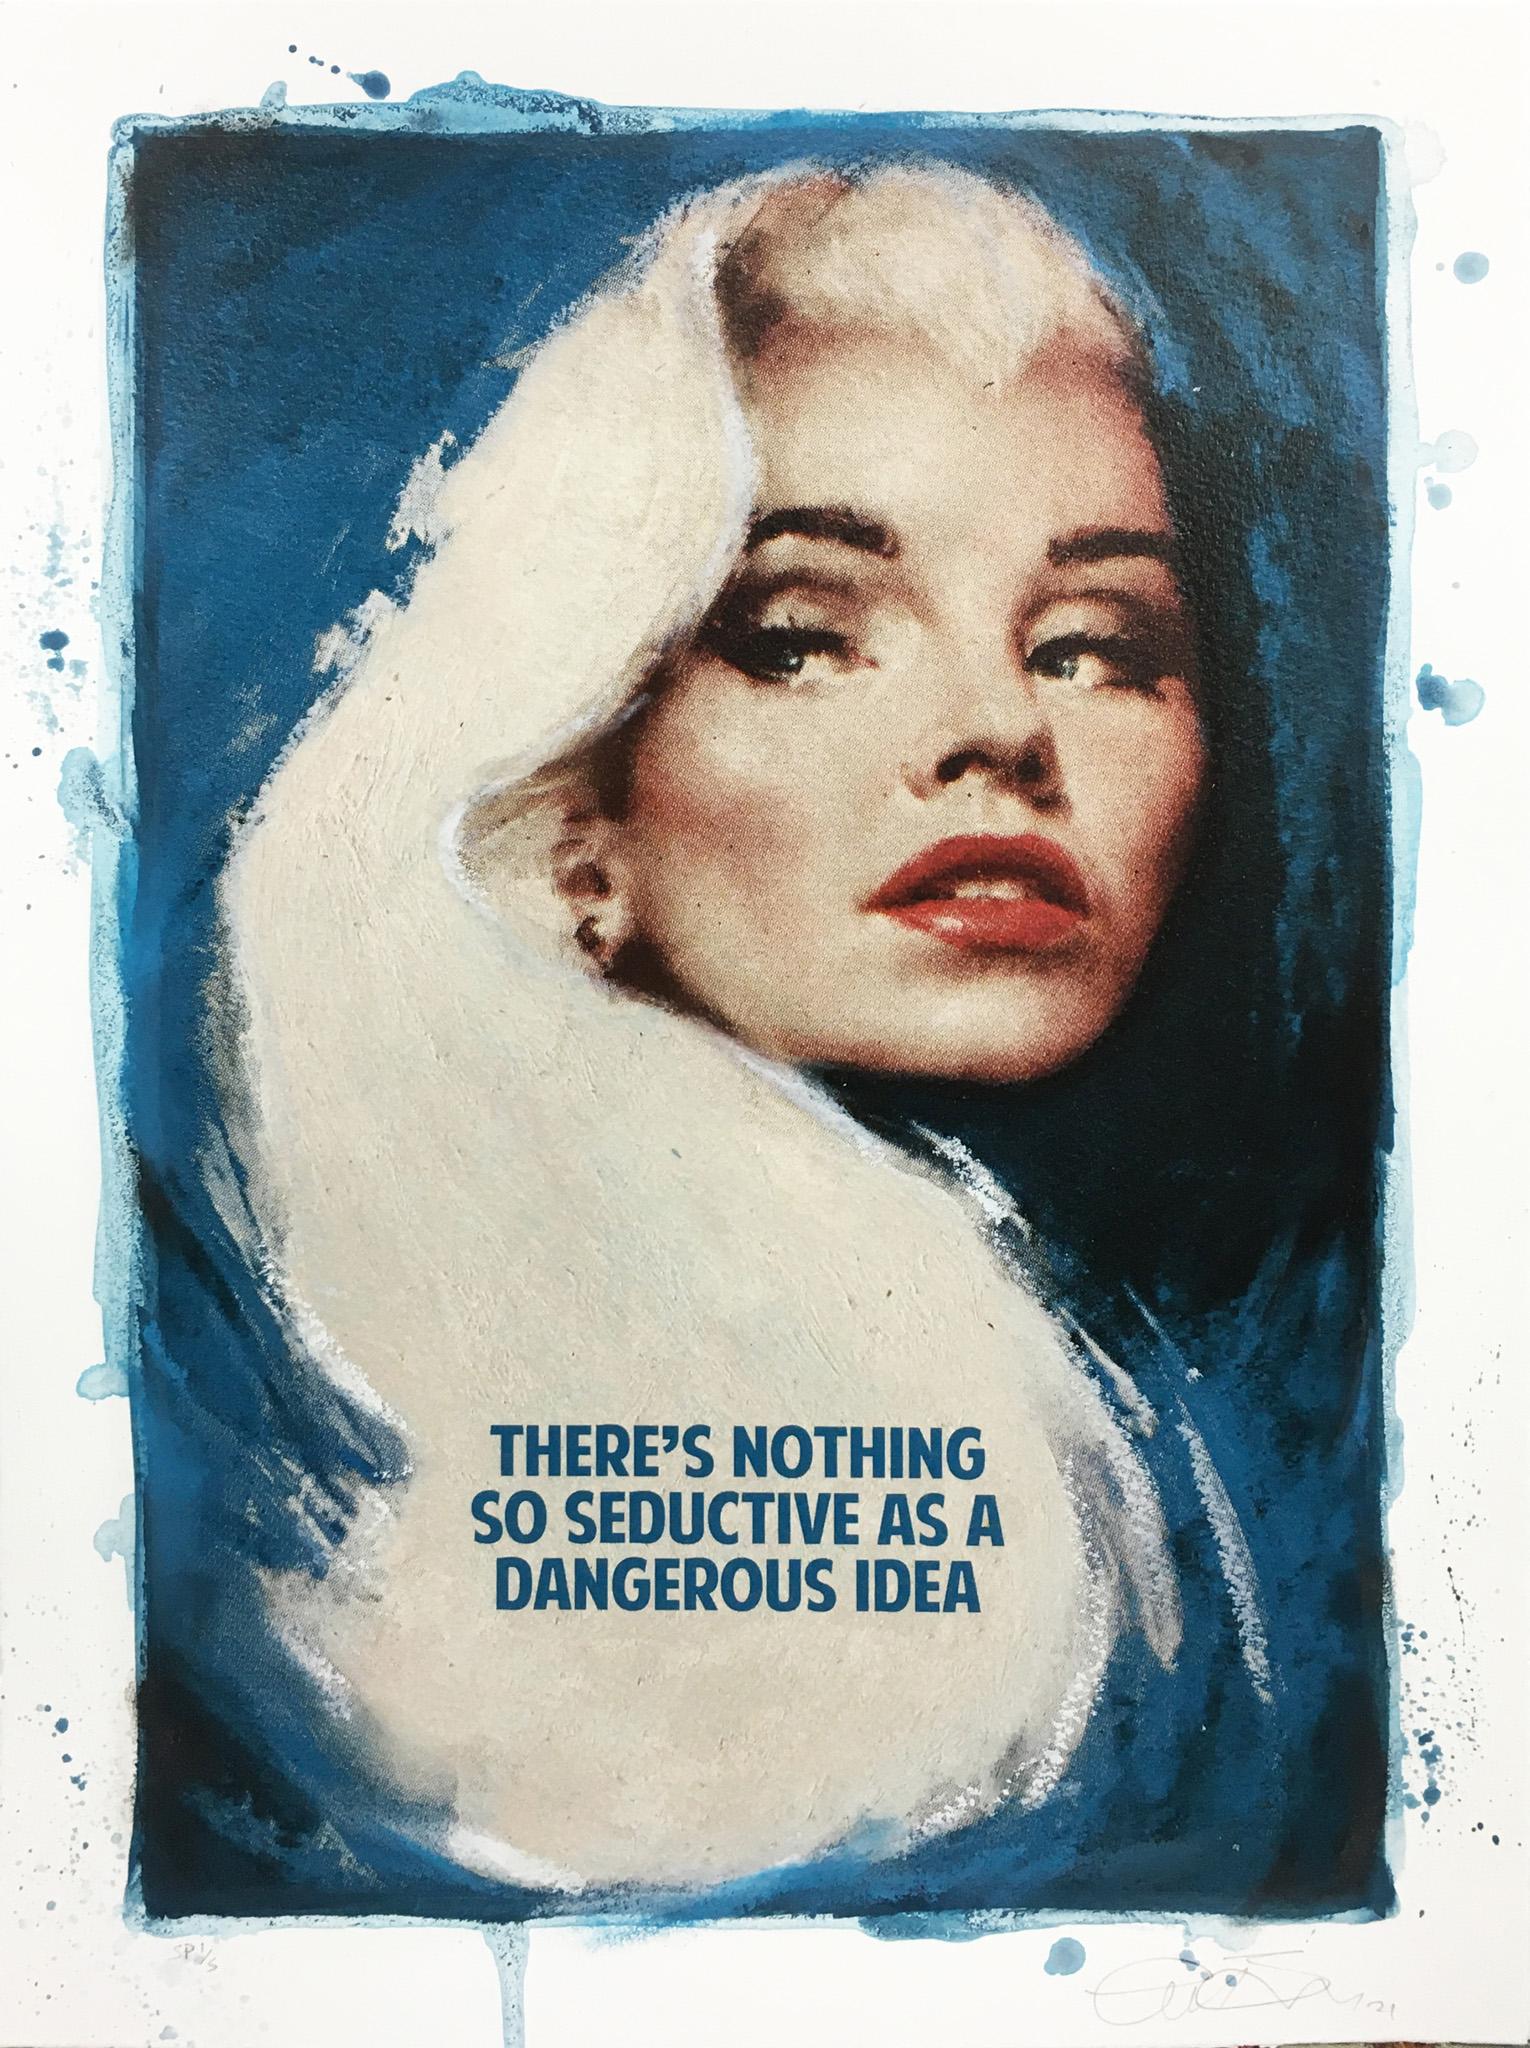 There's Nothing So Seductive as a Dangerous Idea  - Print by The Connor Brothers 